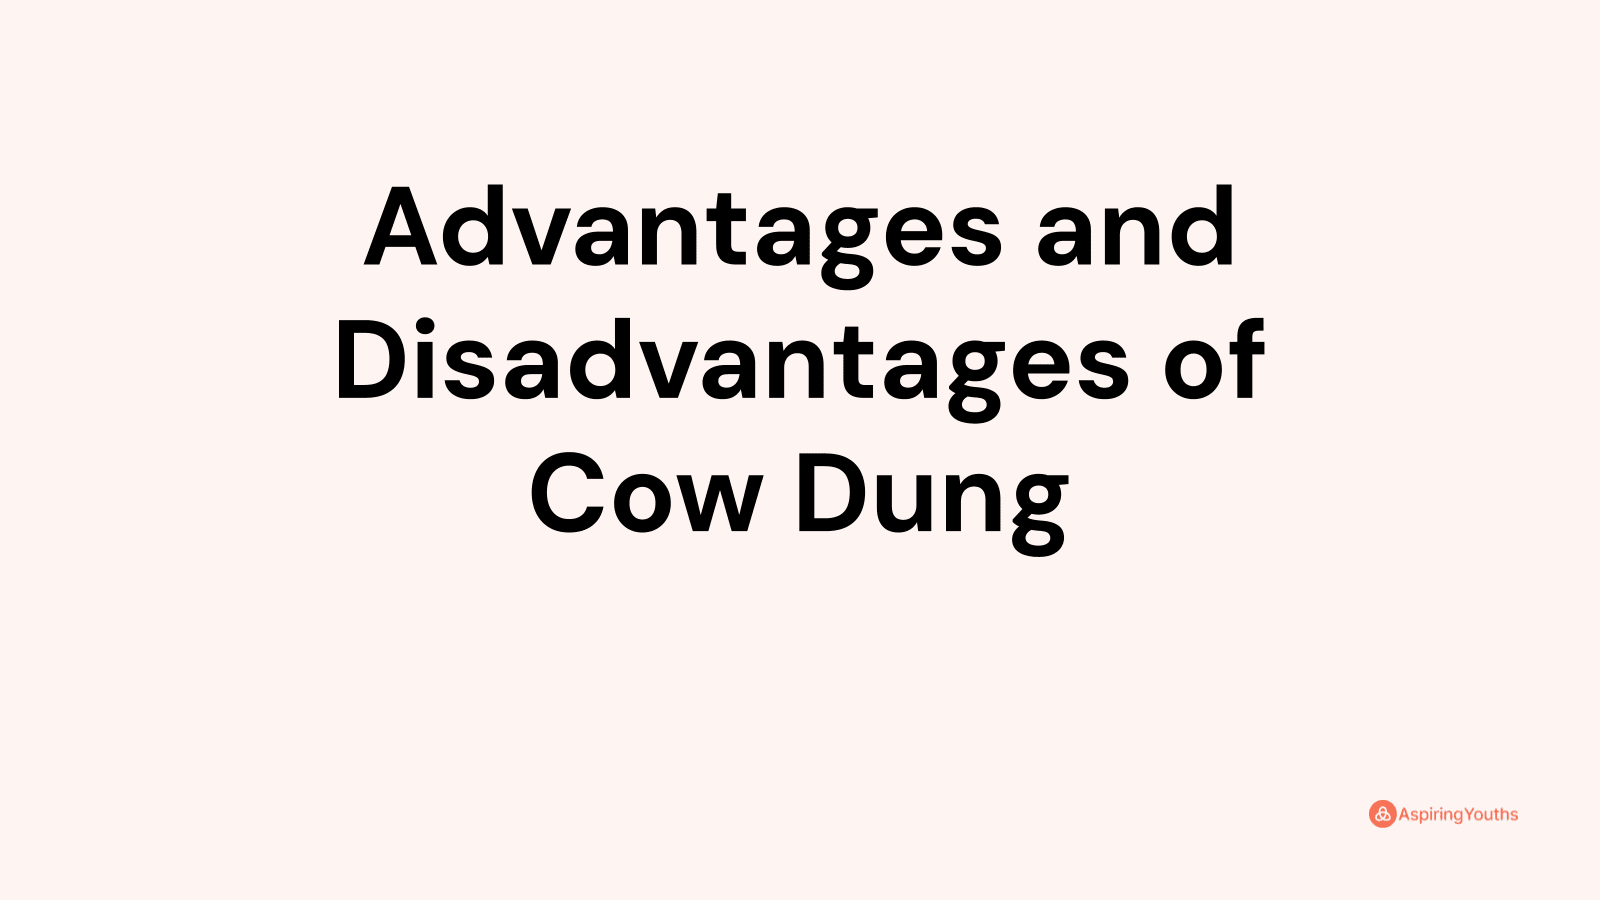 Advantages and disadvantages of Cow Dung